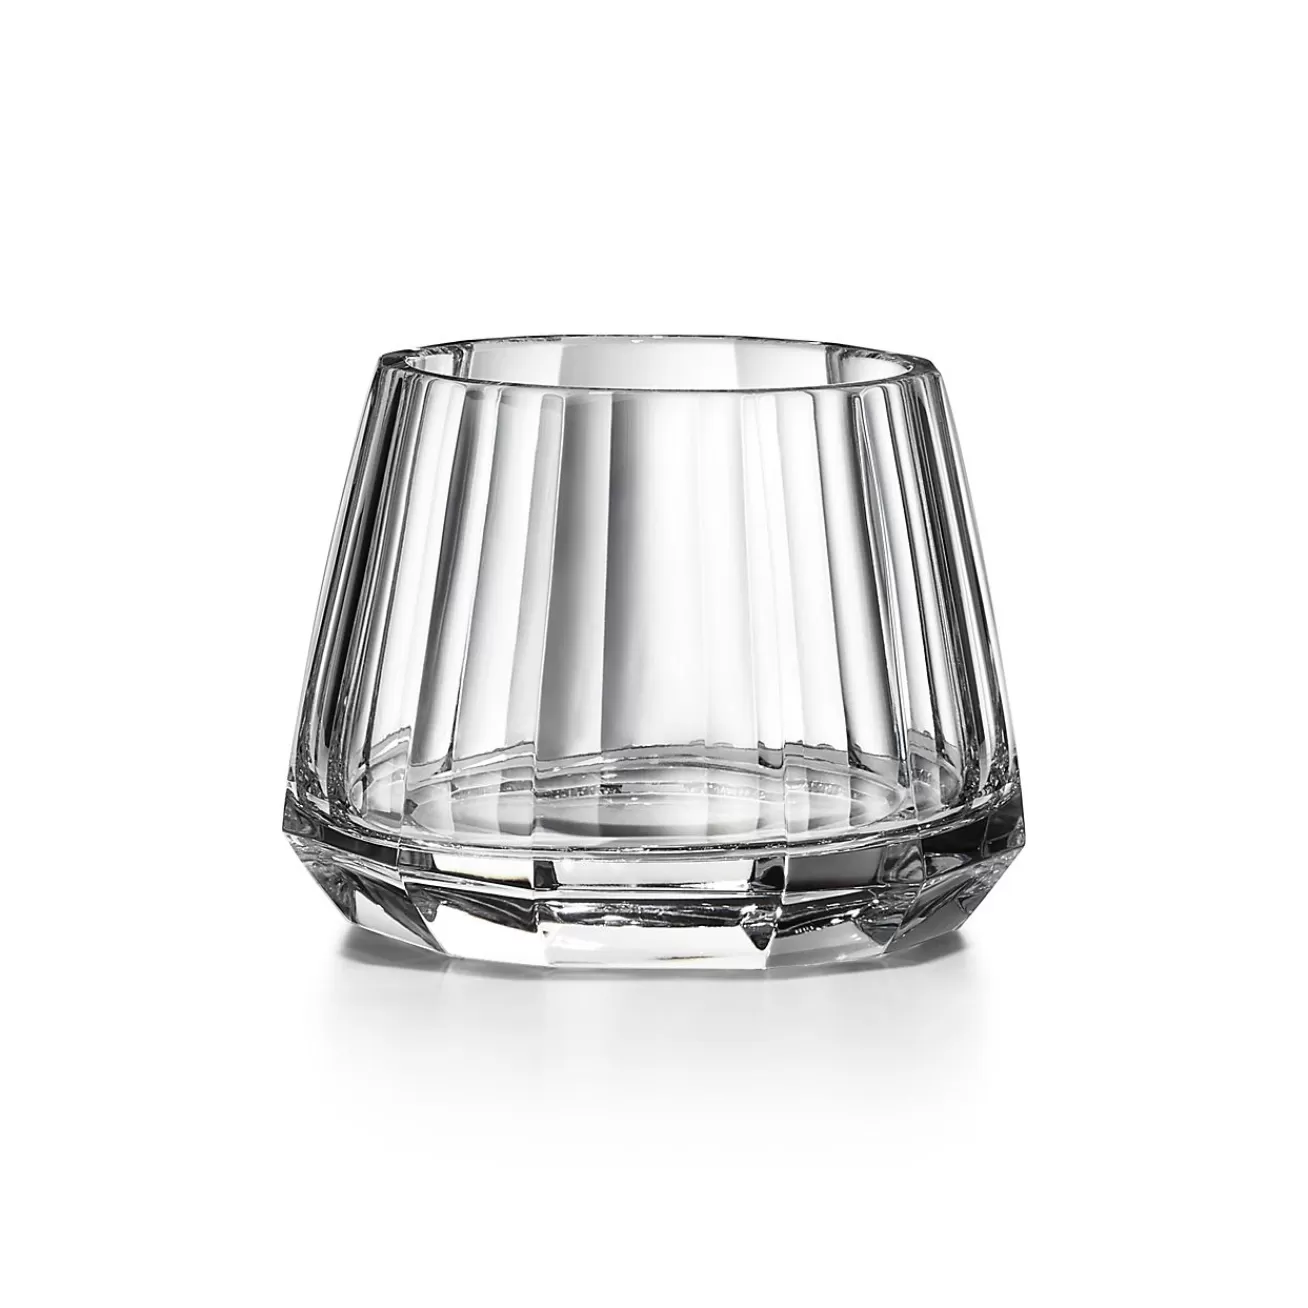 Tiffany & Co. Tiffany Facets Wide Tapered Vase in Lead Crystal Glass | ^ The Home | Housewarming Gifts